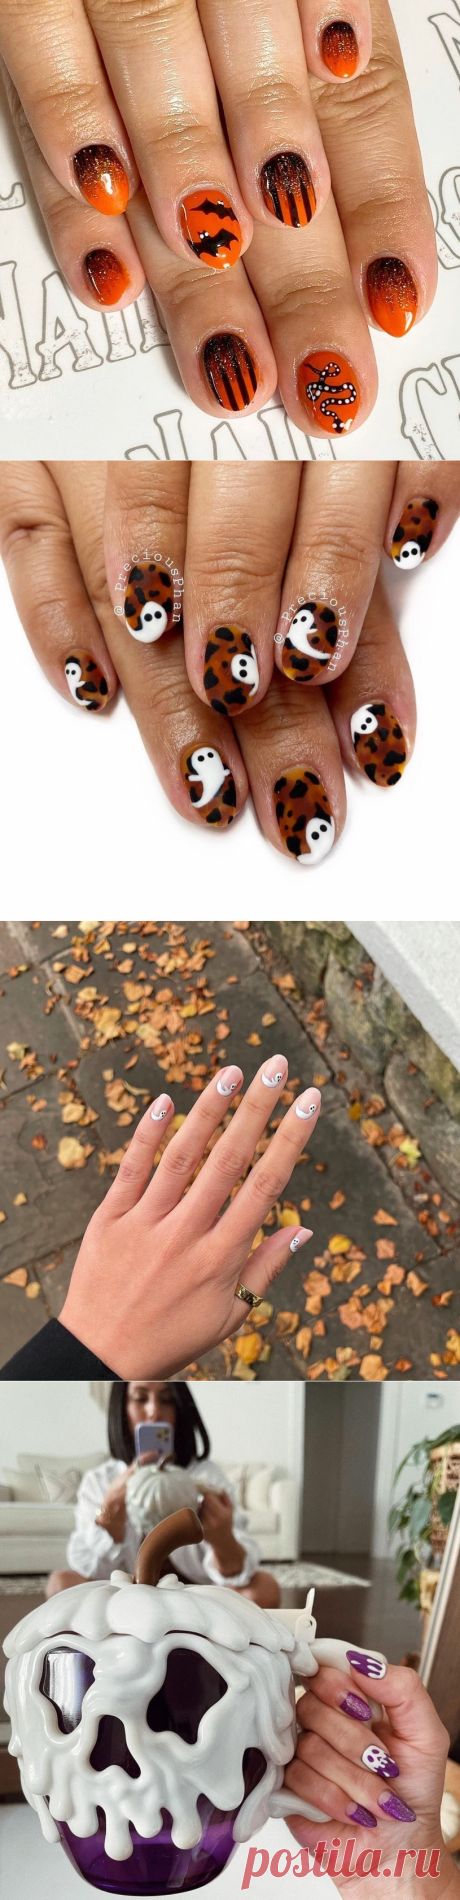 Popular Halloween Nail Design Ideas You’ll Obsess And Should Try This Year | Fashion Blog &amp; Magazine